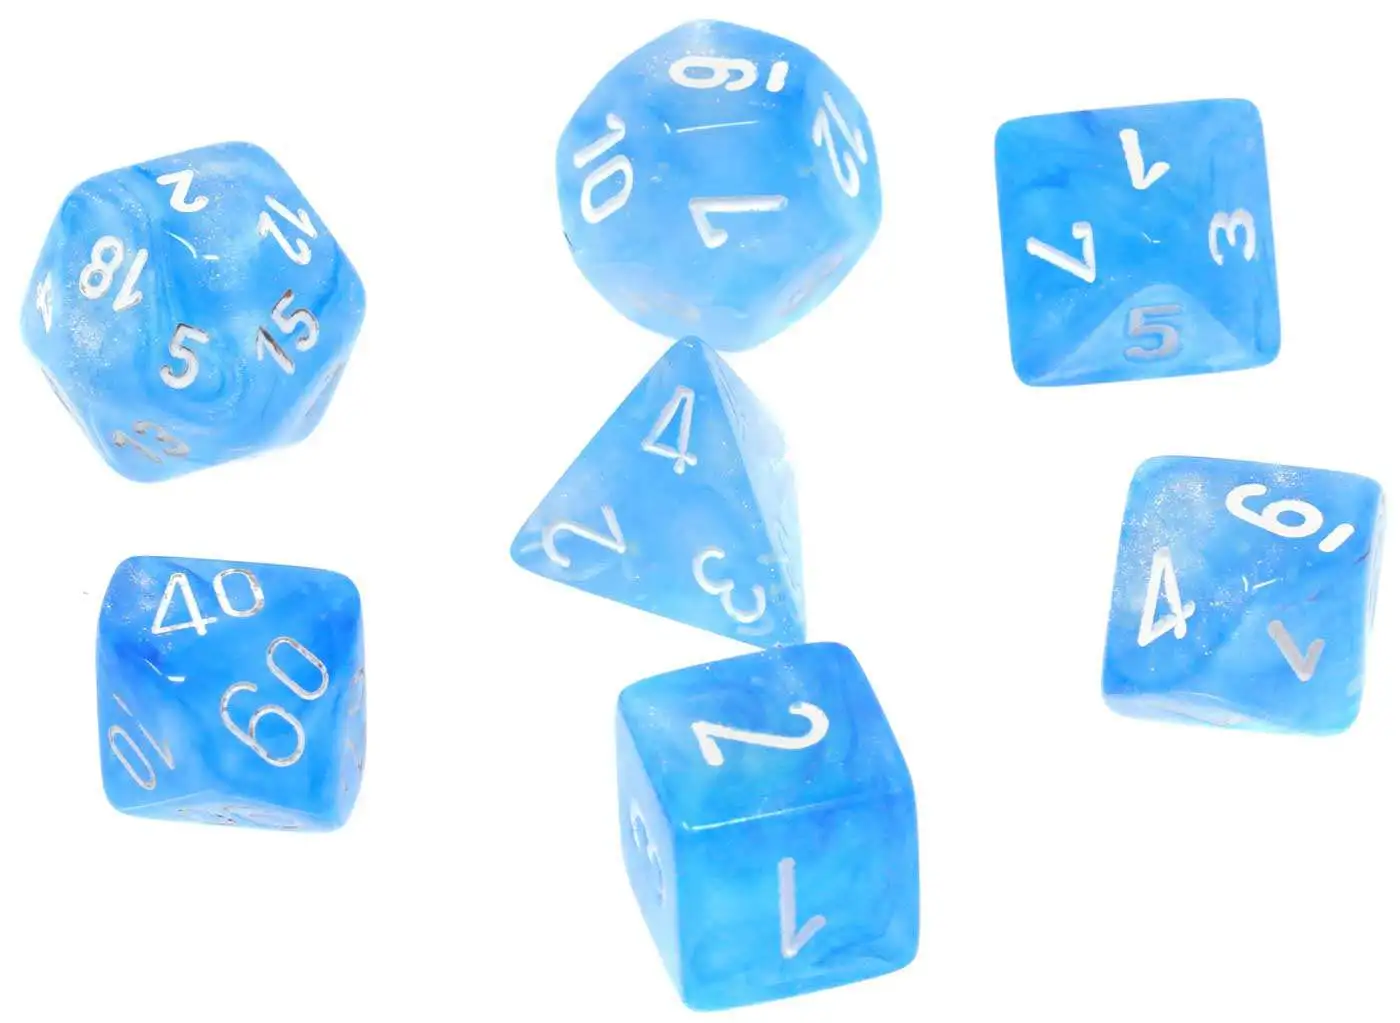 Chessex CHX 27566 Polyhedral Luminary Sky W/ Silver 7 Die B3g1 for sale online 